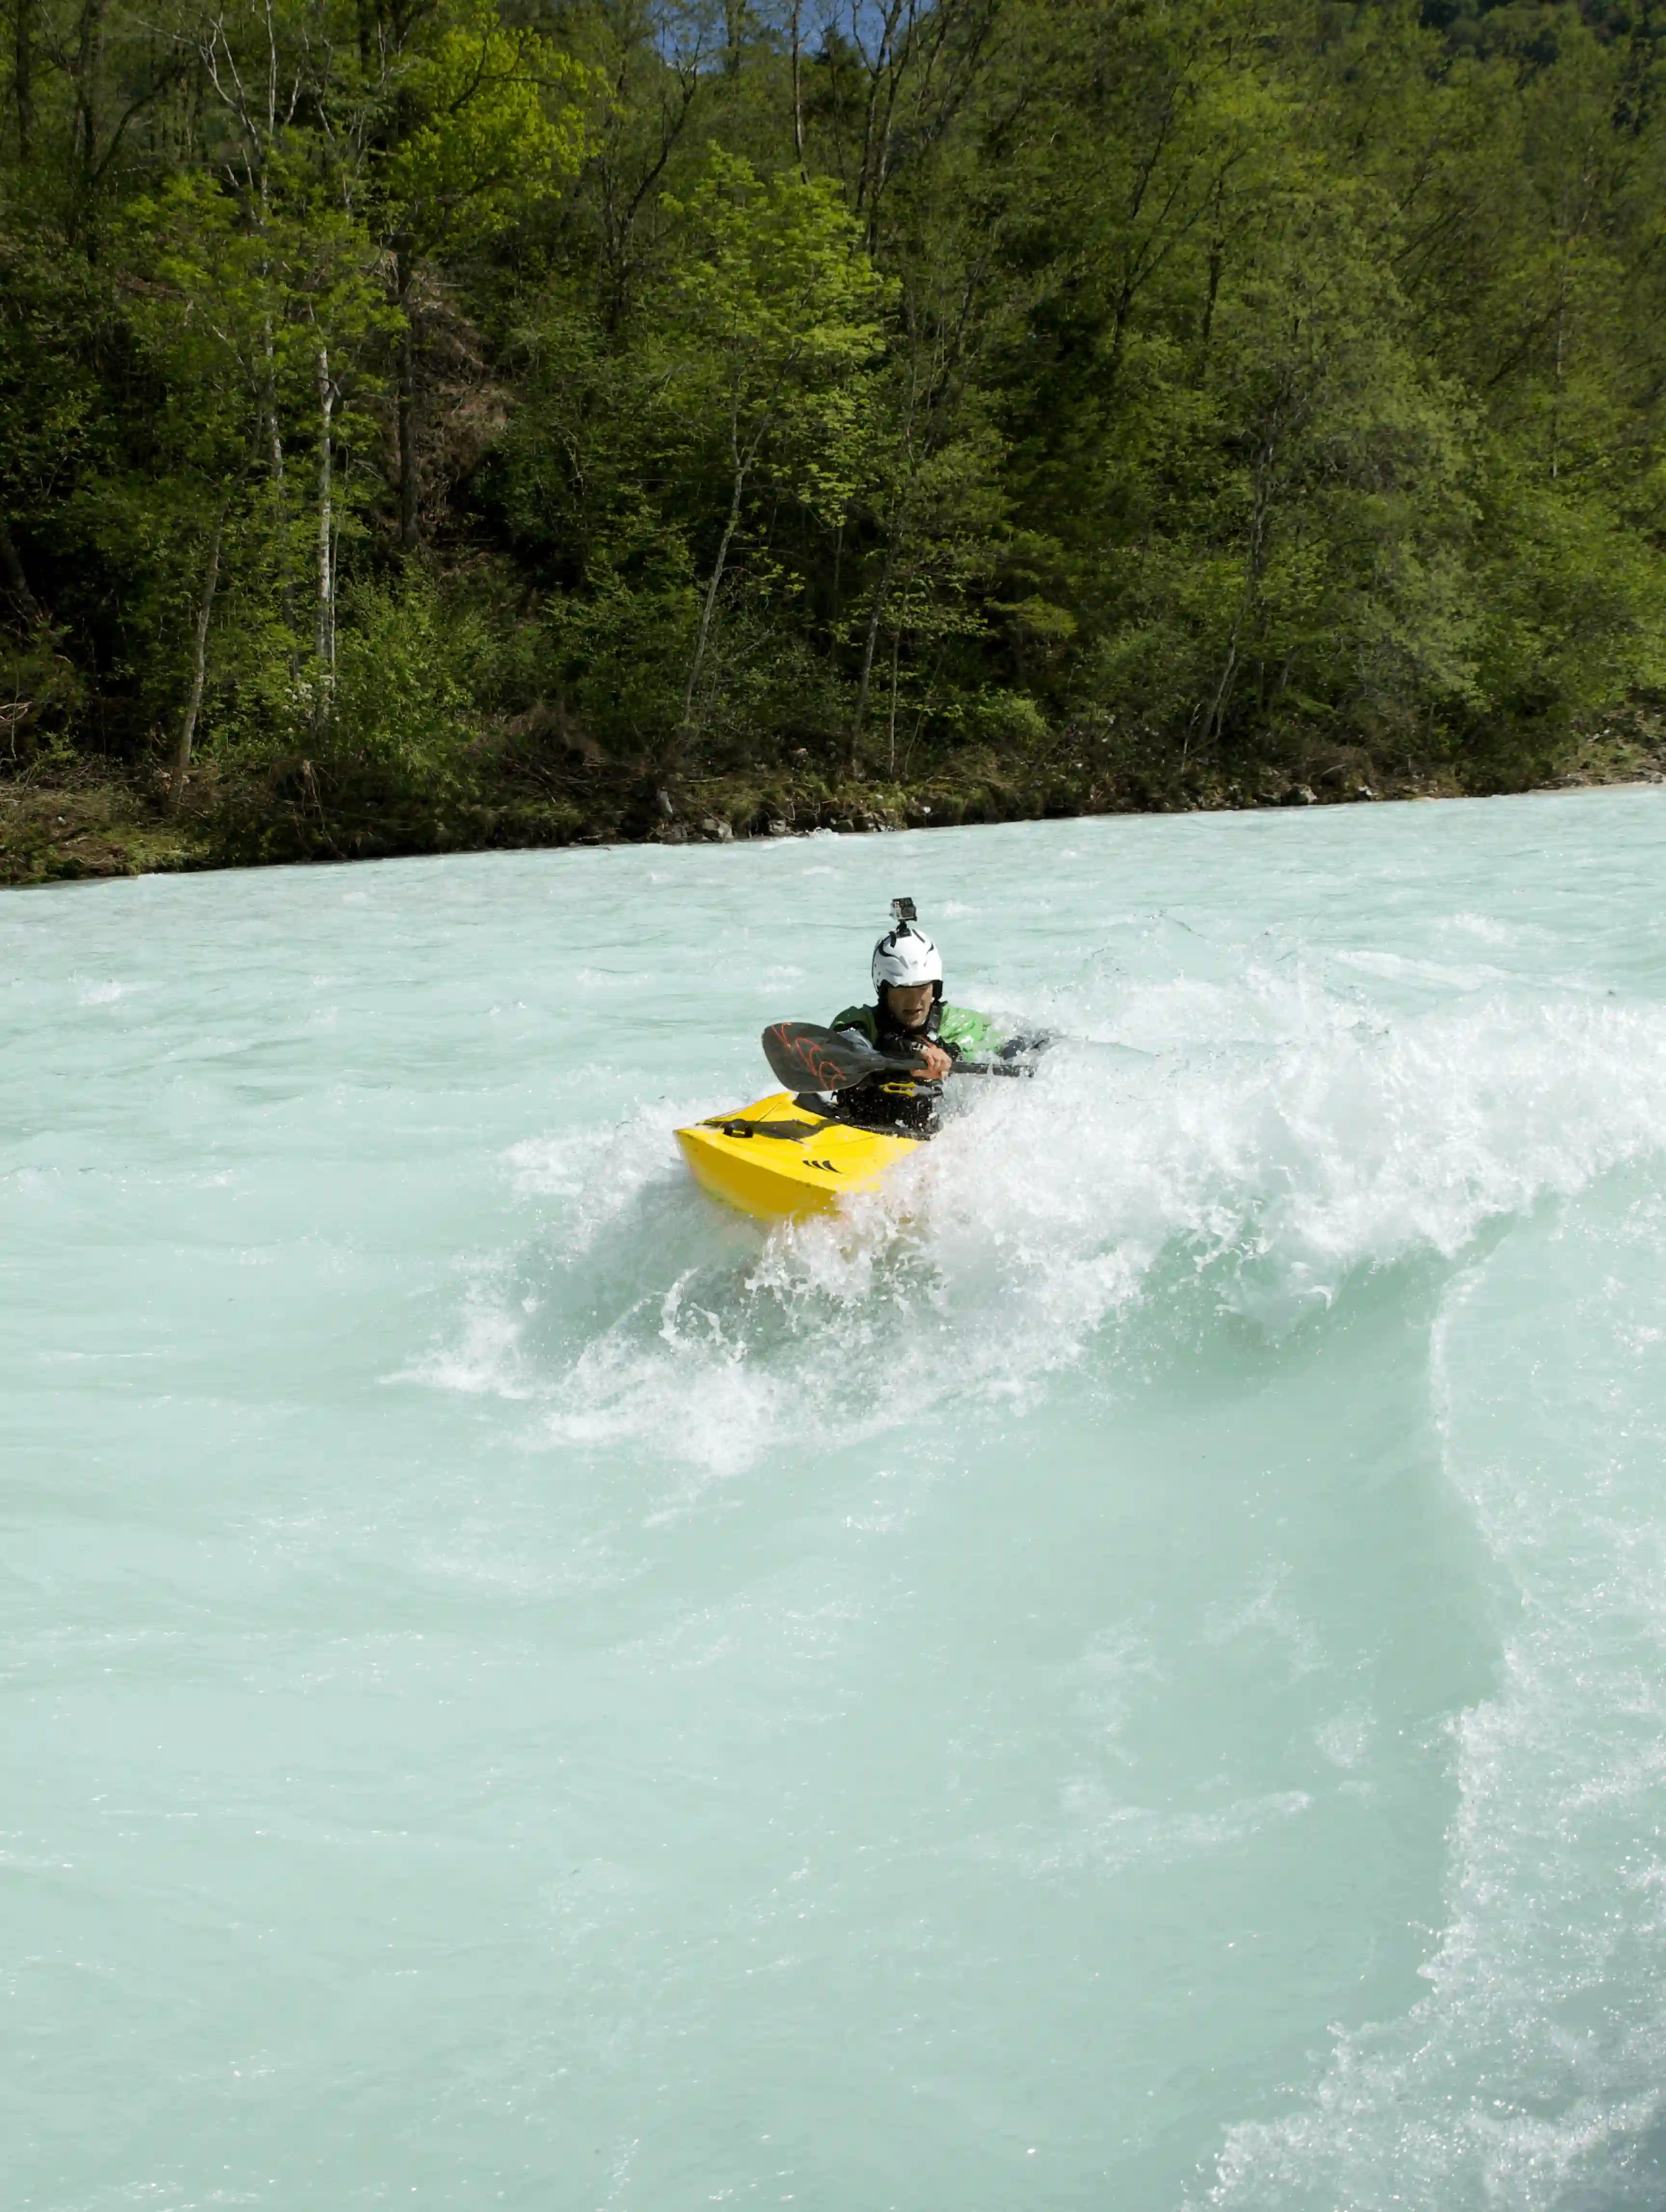 Surfing on the soca river